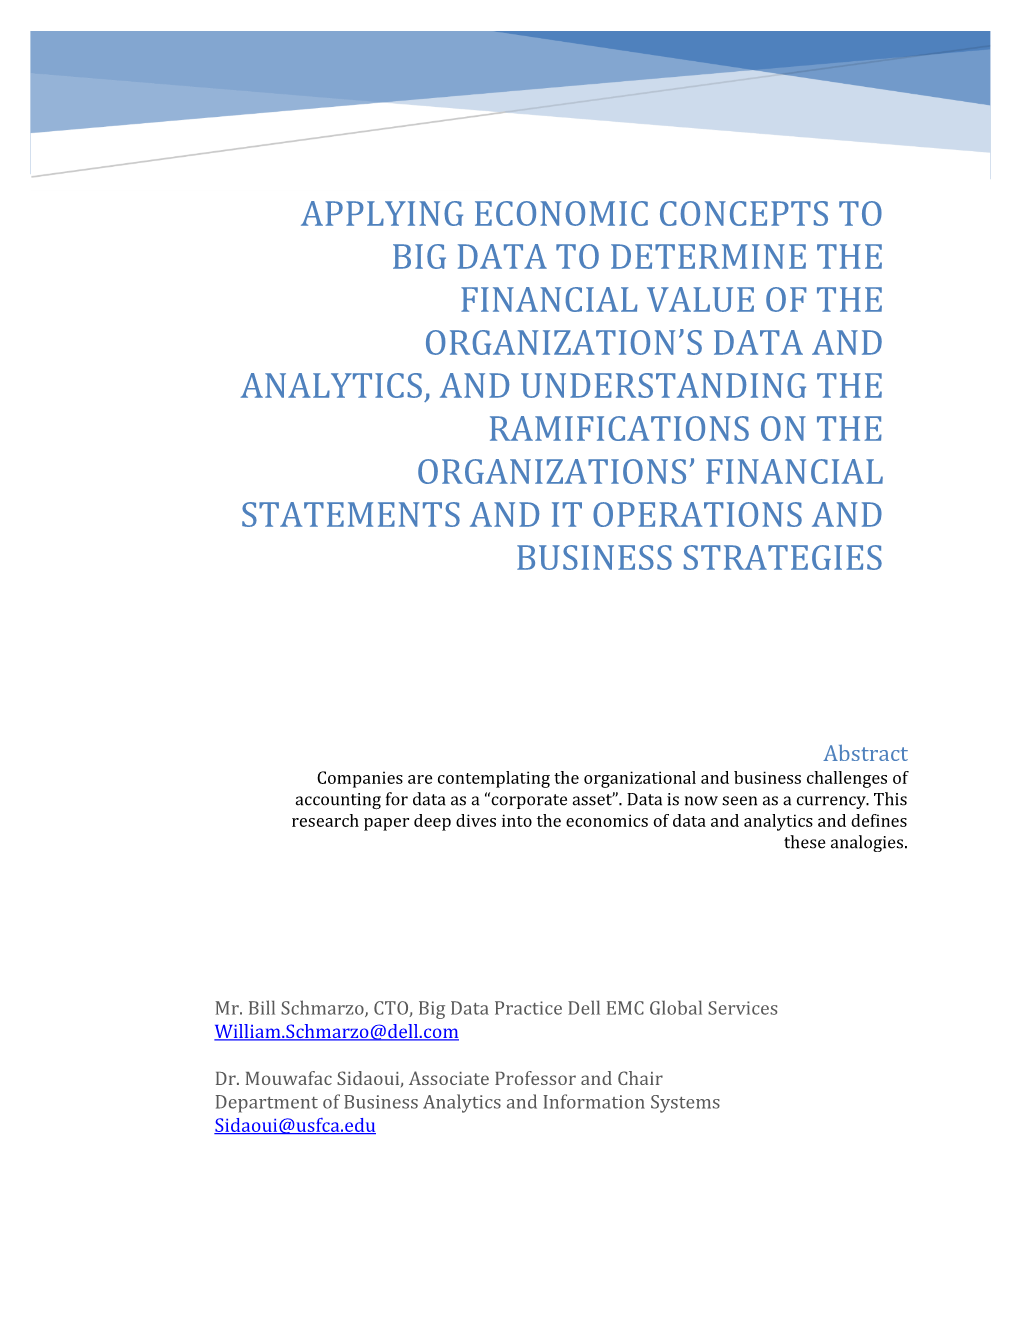 Applying Economic Concepts to Big Data to Determine the Financial